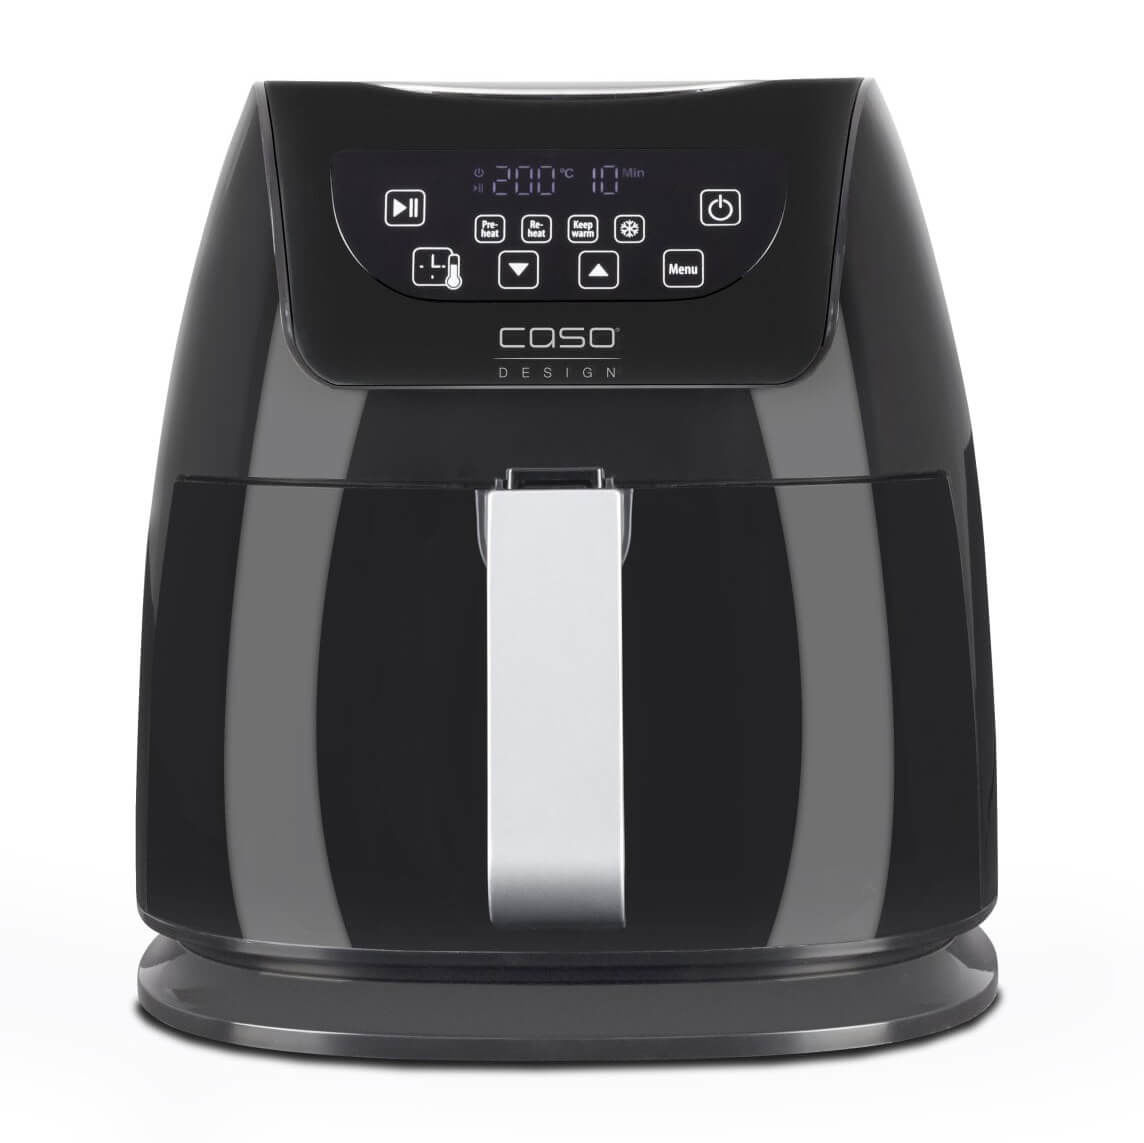 Image of Caso Airfryer AF250 Friteuse bei nettoshop.ch